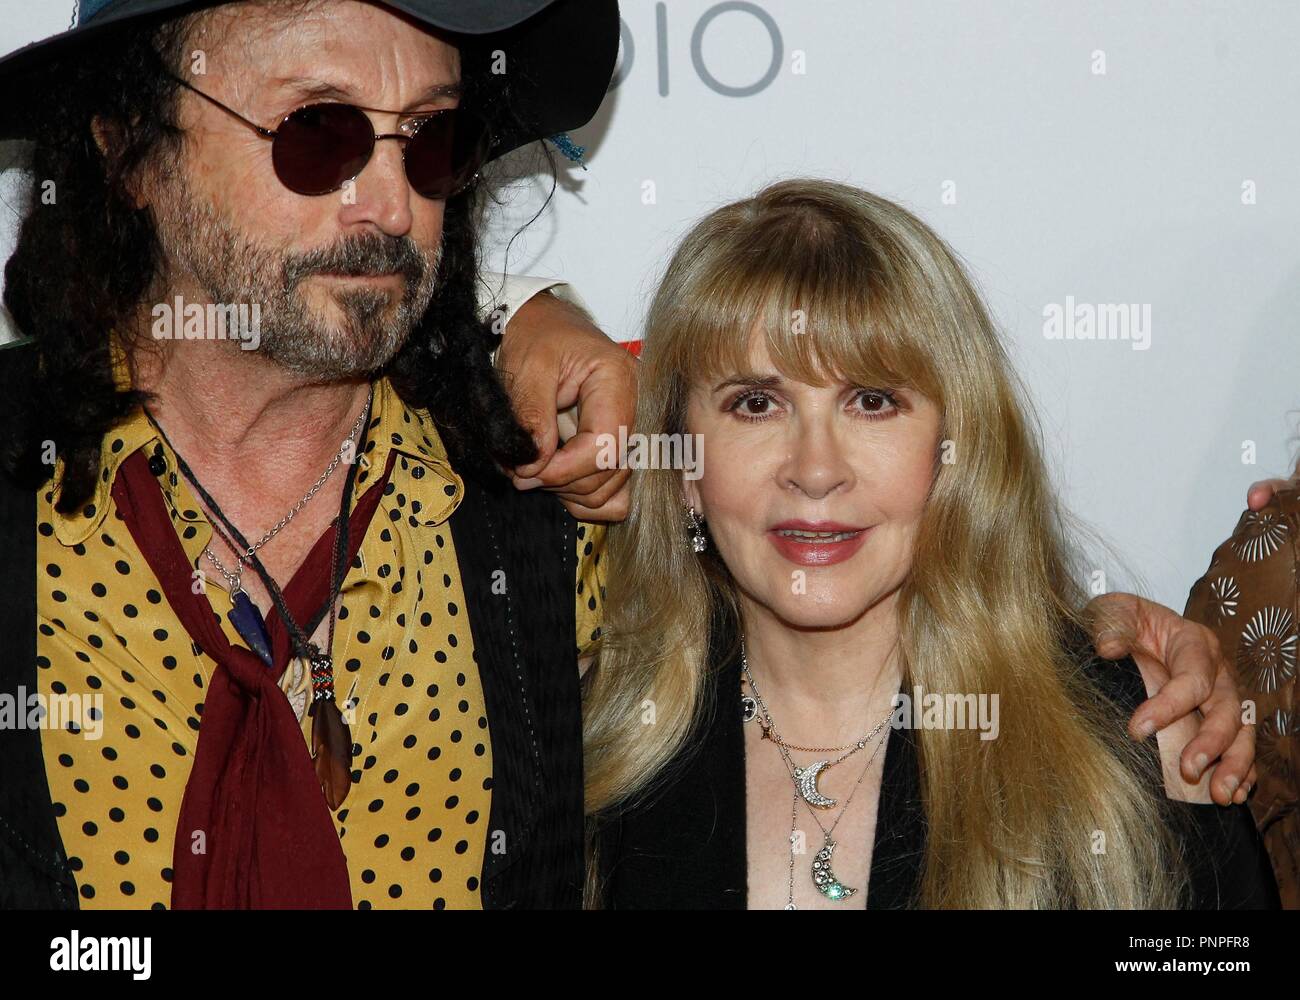 Las Vegas, USA. . 21st Sep, 2018. Mike Campbell, Stevie Nicks of Fleetwood  Mac at arrivals for 2018 iHeartRadio Music Festival and Daytime Stage - FRI  2, T-Mobile Arena, Las Vegas, NV